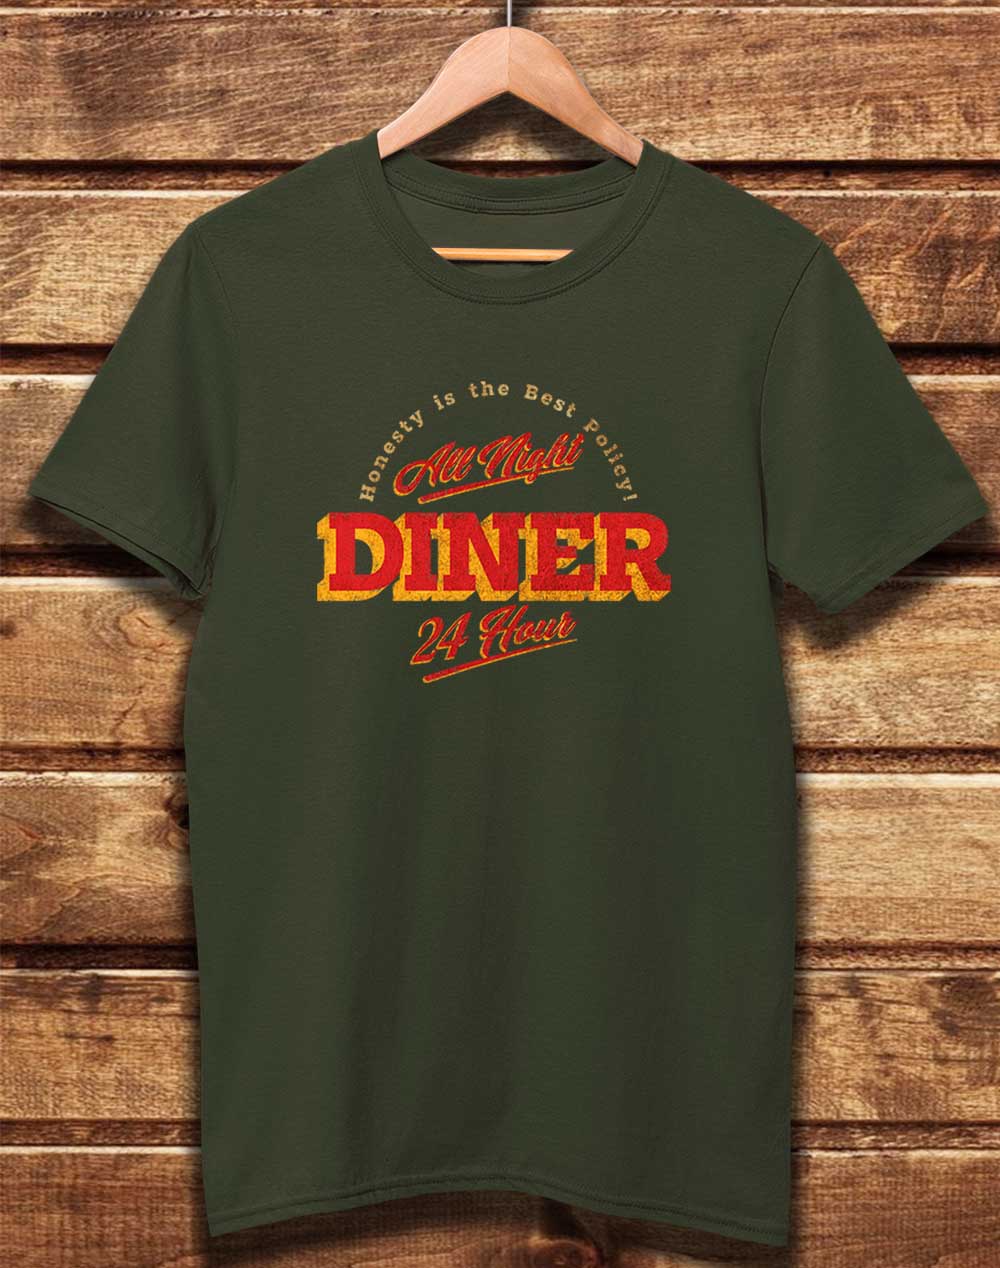 Moss Green - DELUXE 24 Hour Diner Organic Cotton T-Shirt